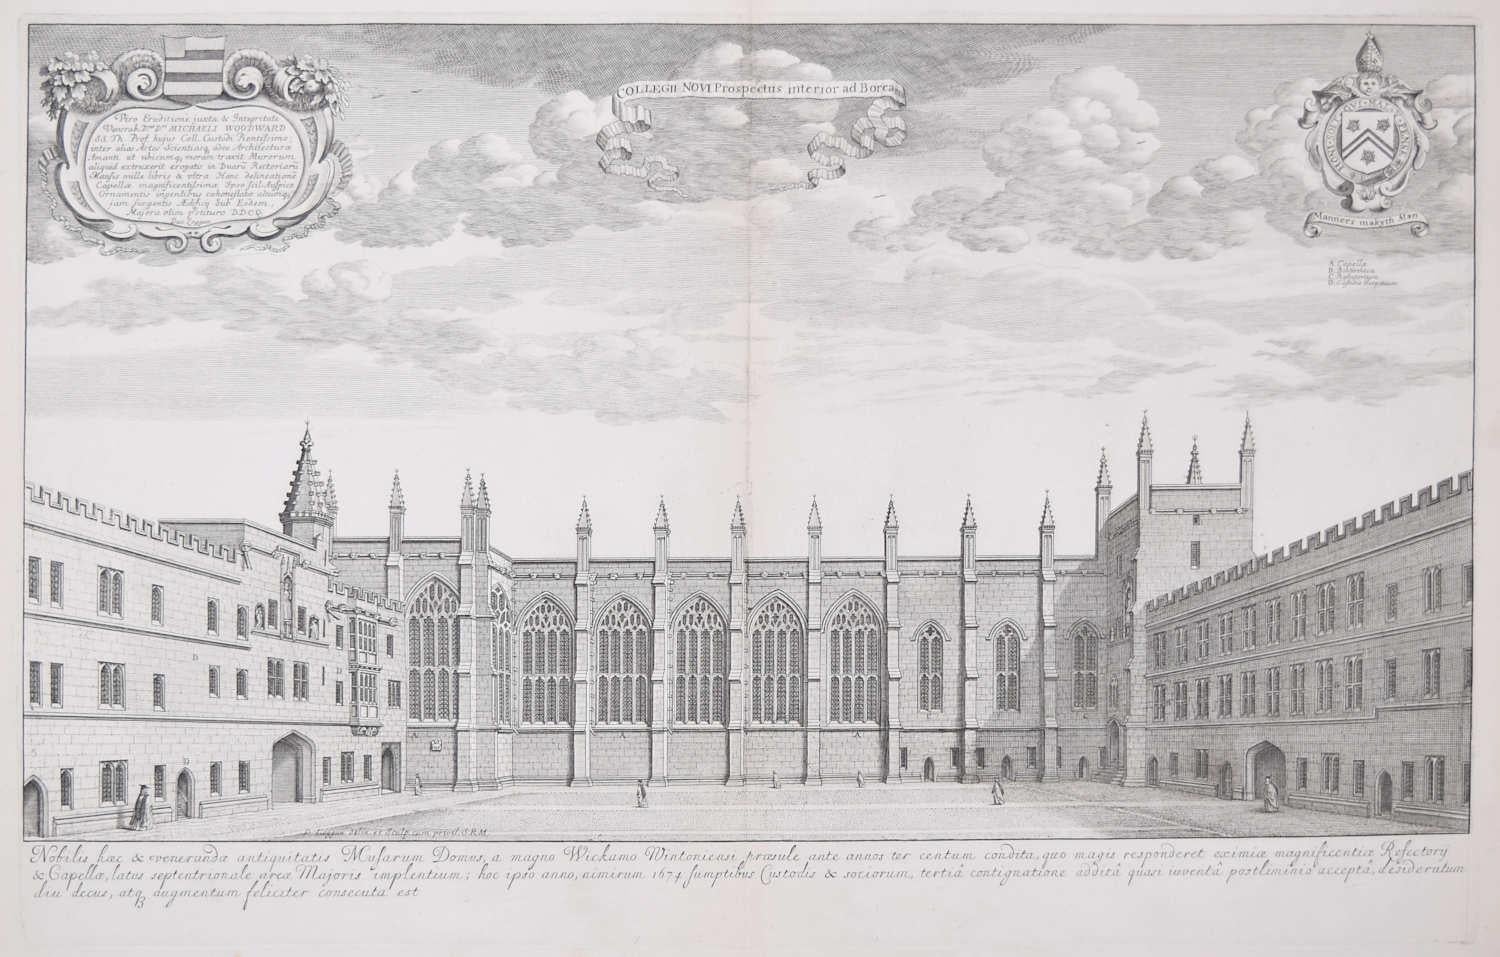 David Loggan (1634-1692)
Engraving of the interior of New College, Oxford
Engraving, 1674
48.5 x 27.2cm

To see our other views of Oxford and Cambridge, scroll down to "More from this Seller" and below it click on "See all from this Seller" - or